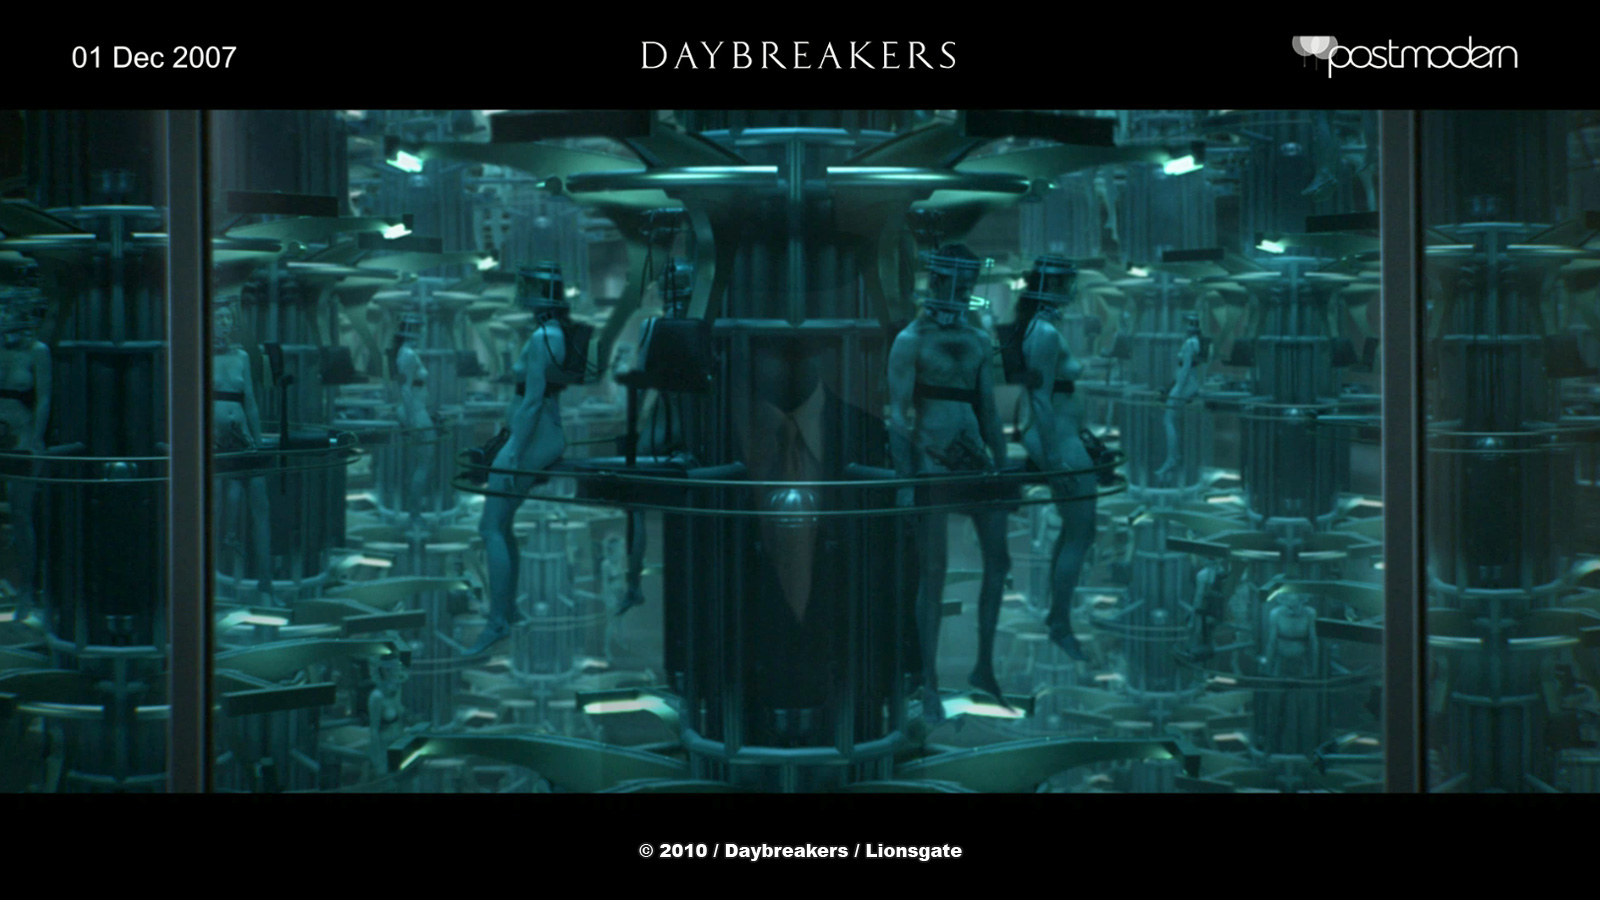 High Resolution Wallpaper | Daybreakers 1600x900 px